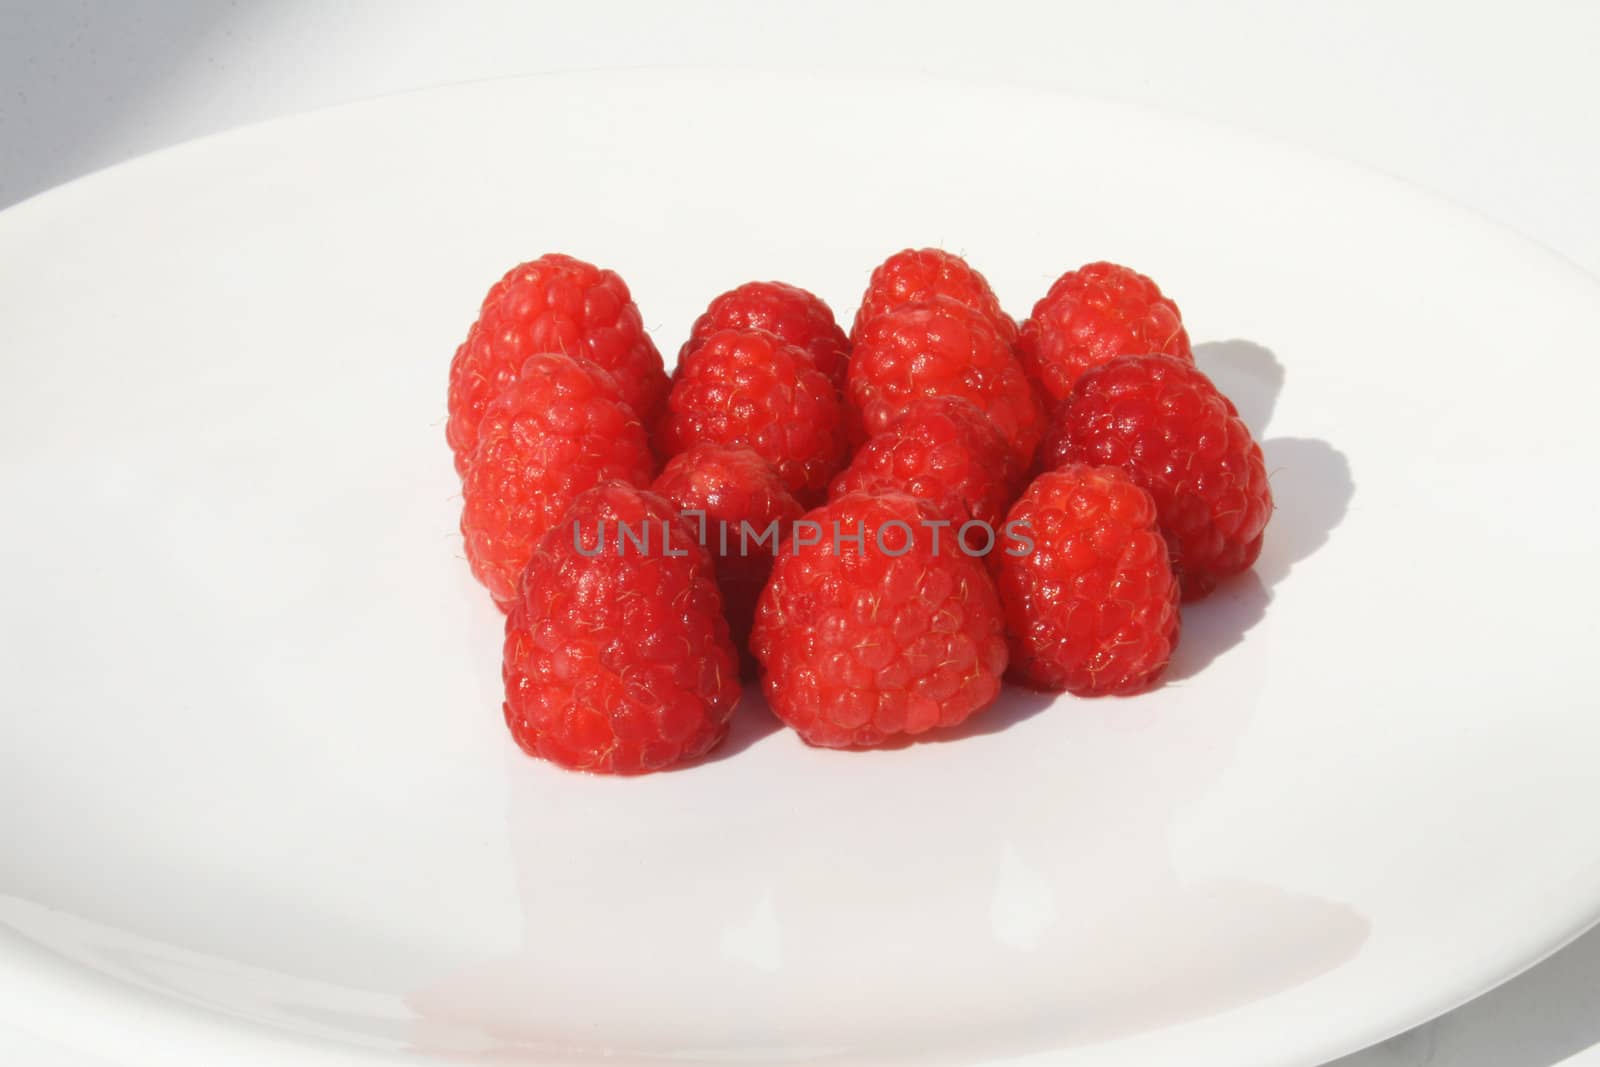 Grouping of raspberries on white plate